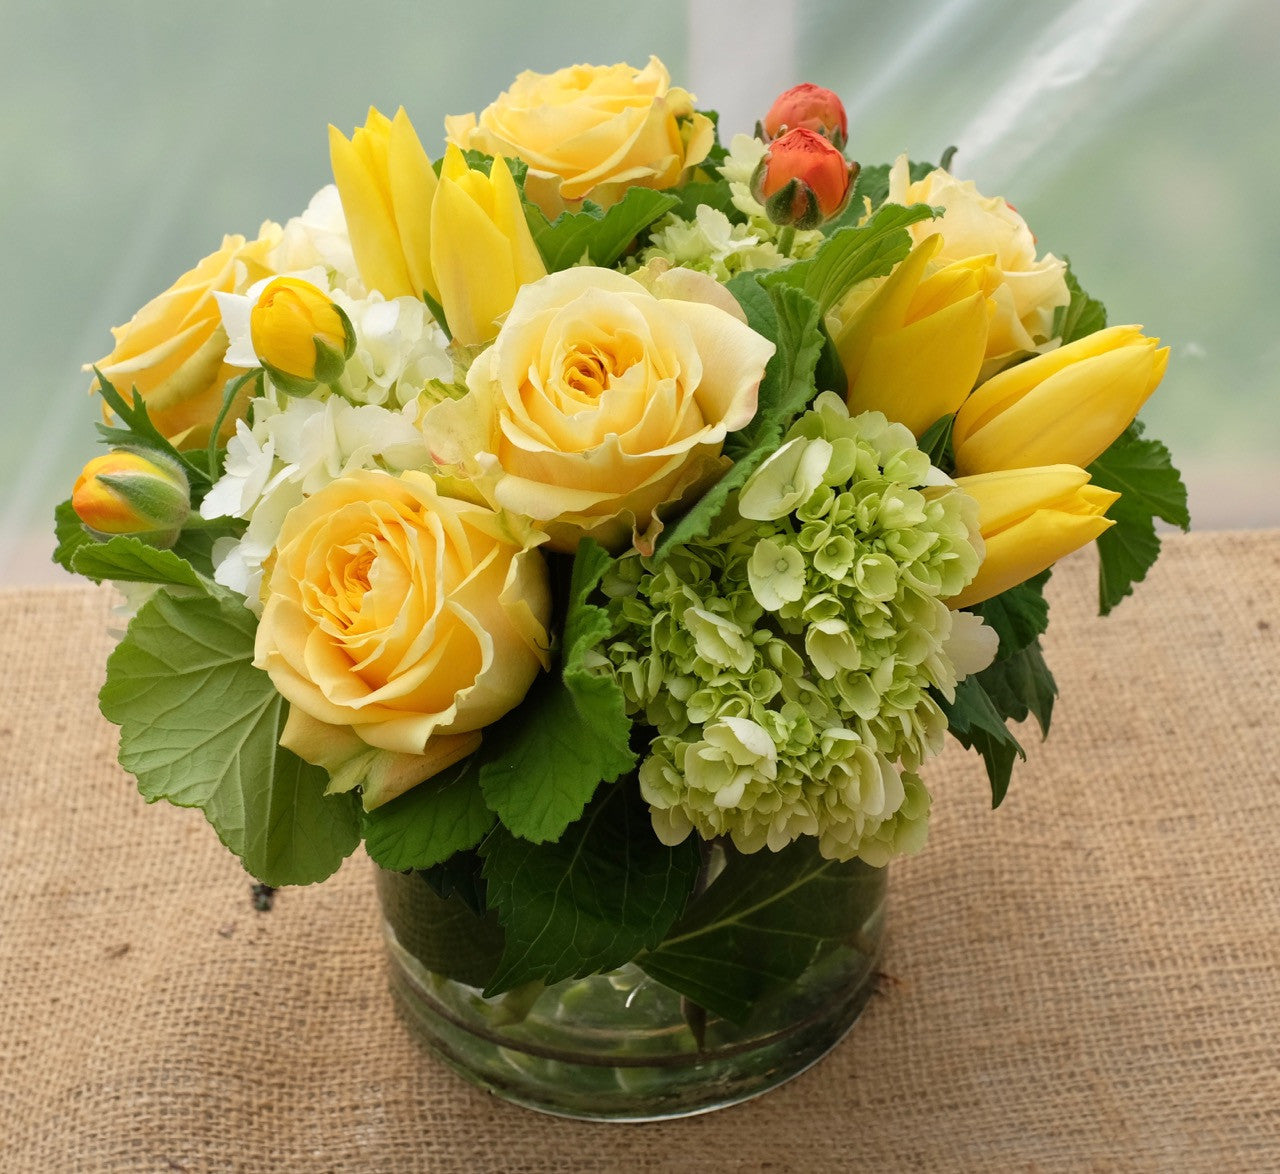 Madris Flower Arrangement with yellow roses, tulips, ranunculus and hydrangea. Designed by Michler's Florist in Lexington, KY